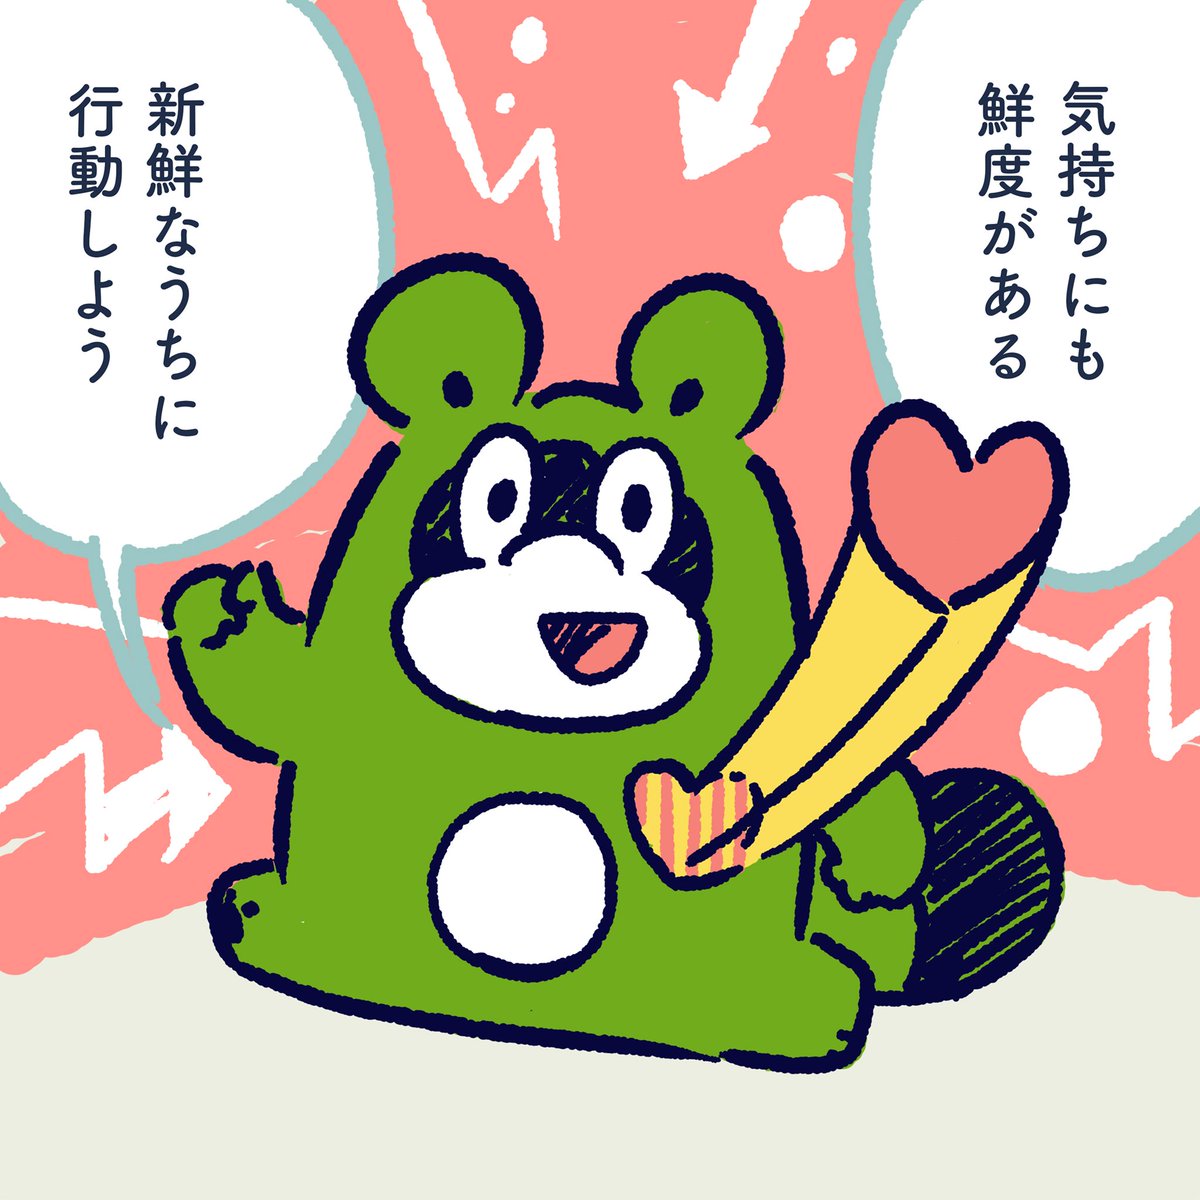 There is freshness also in the feeling. Let's act while being fresh. #今日のポコタ #イラスト #マンガ 